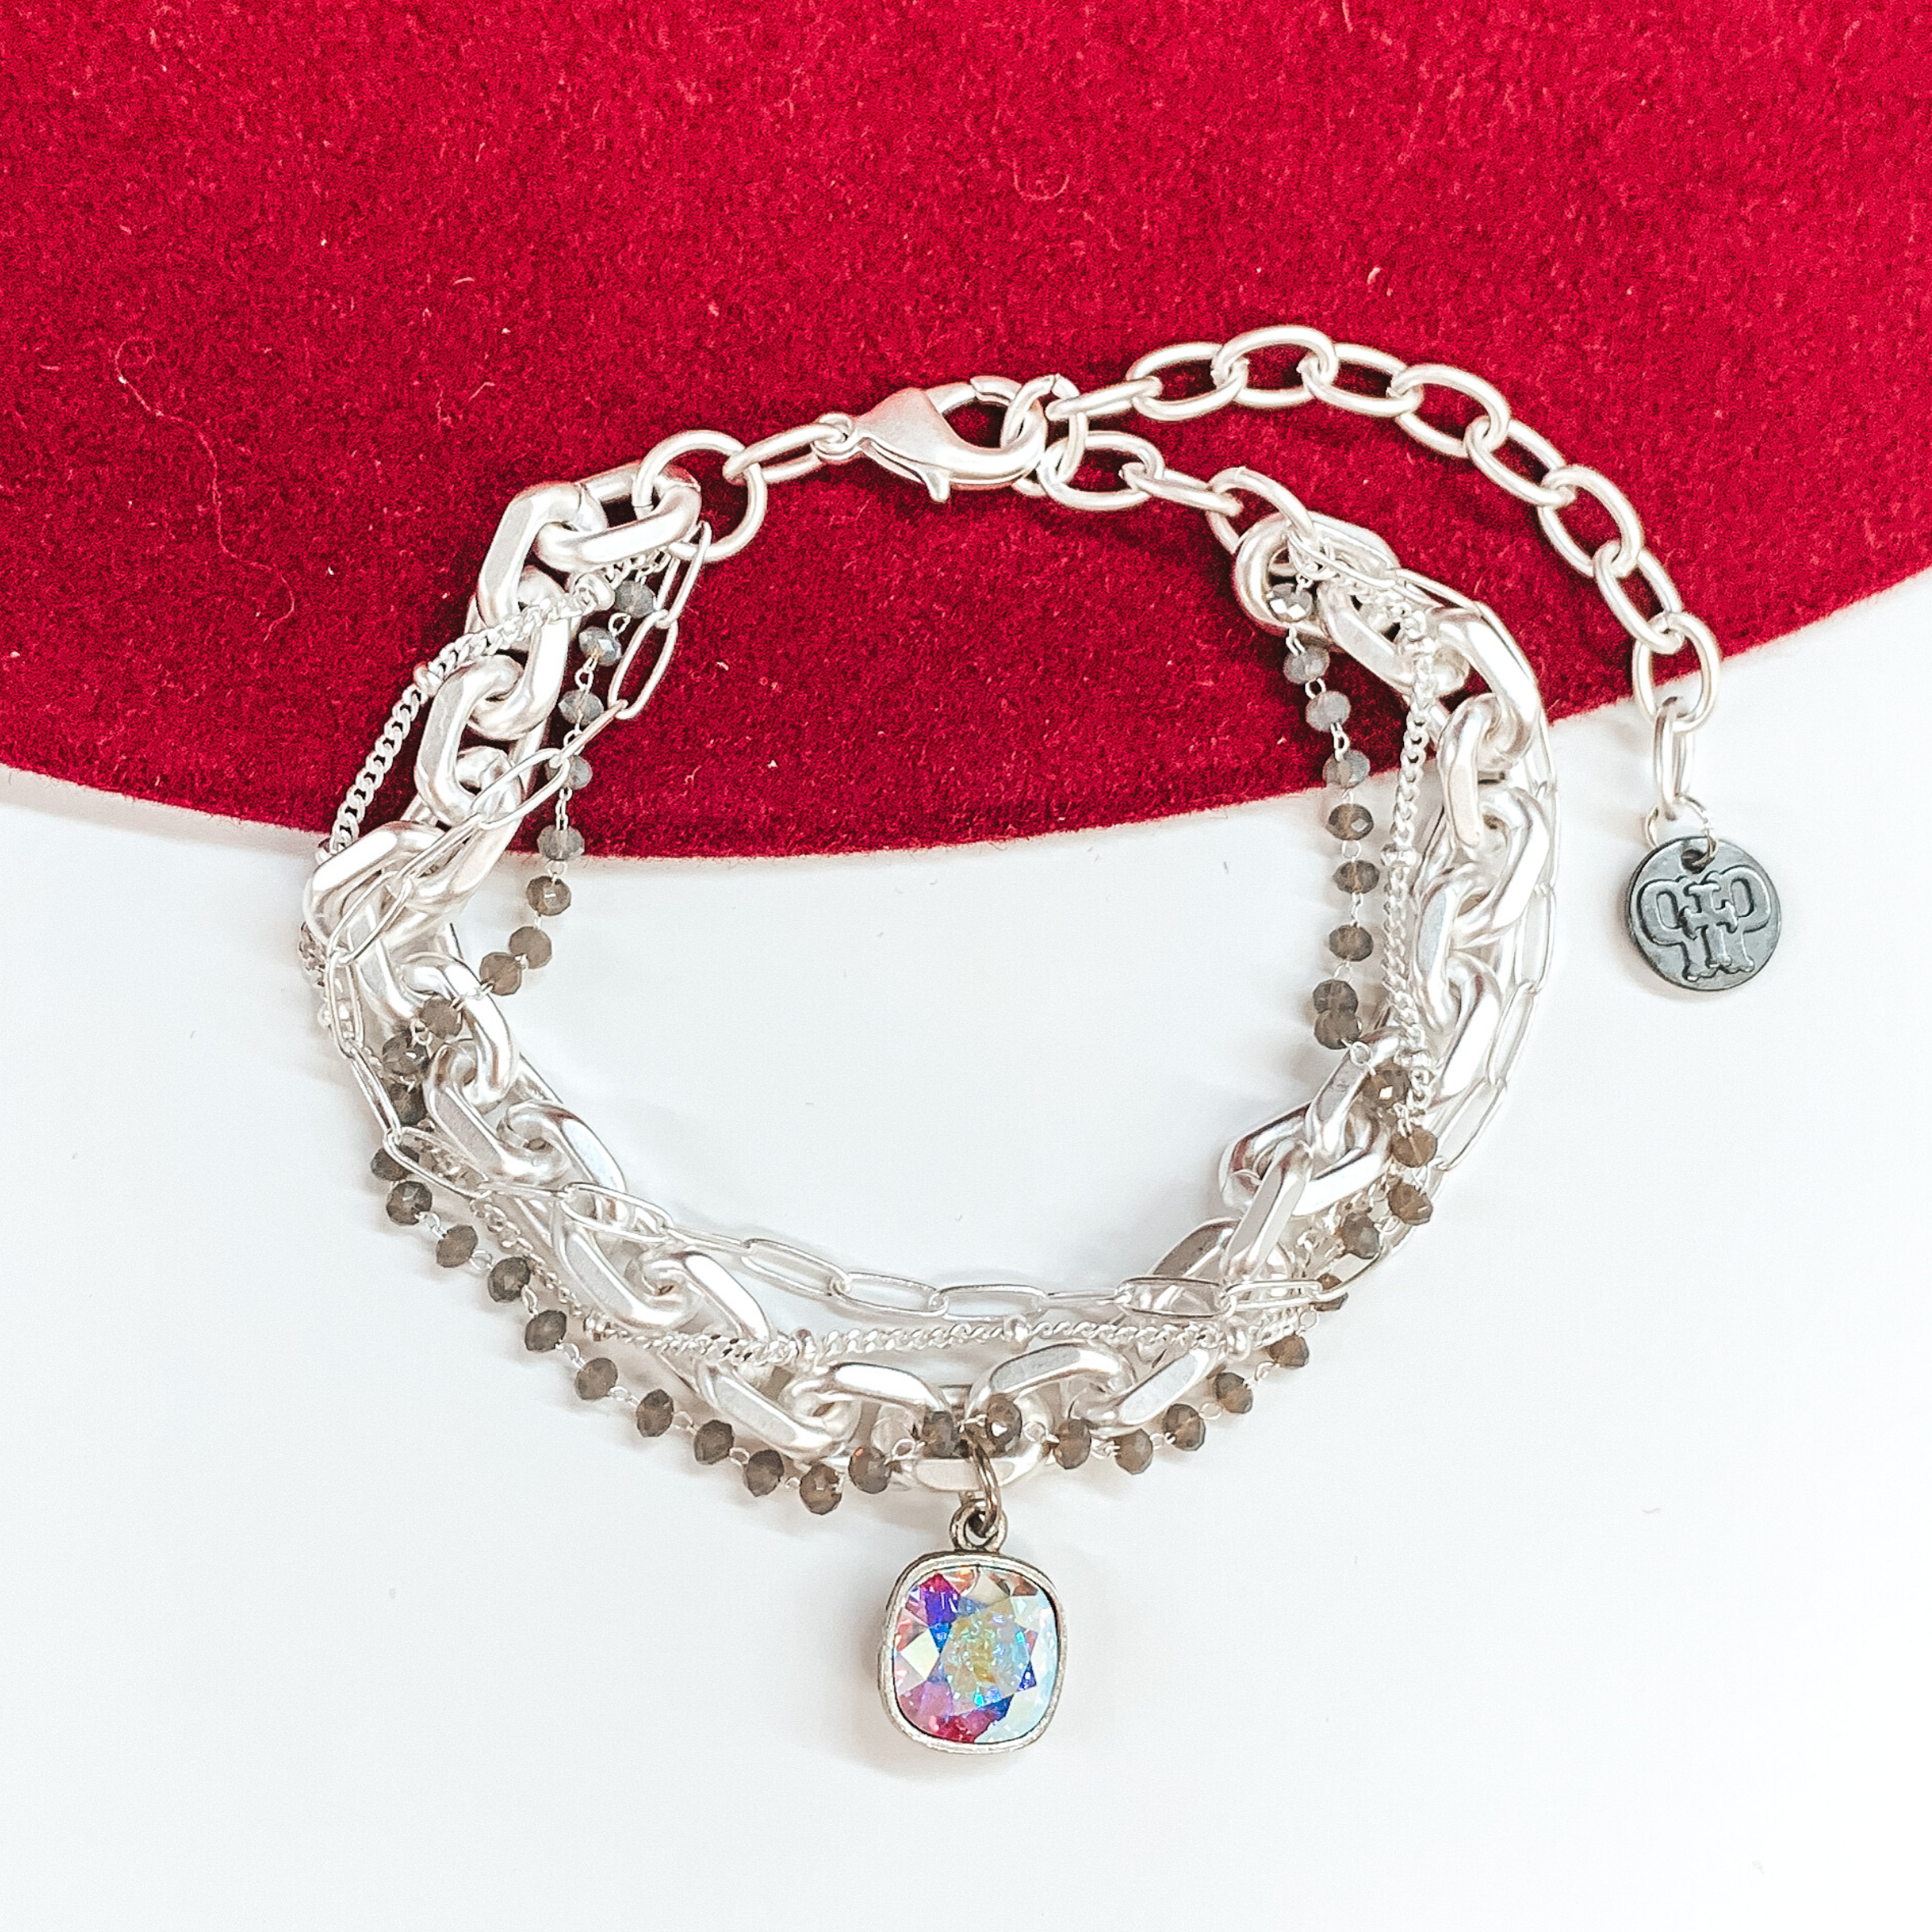 Silver, adjustable bracelet that includes a thick chain strnad, crystal beaded strand, a thin paperlcip chain strand, and a small chain strand. There is also an AB cushion cut crystal drop. this bracelet is pictured on a white and red background.